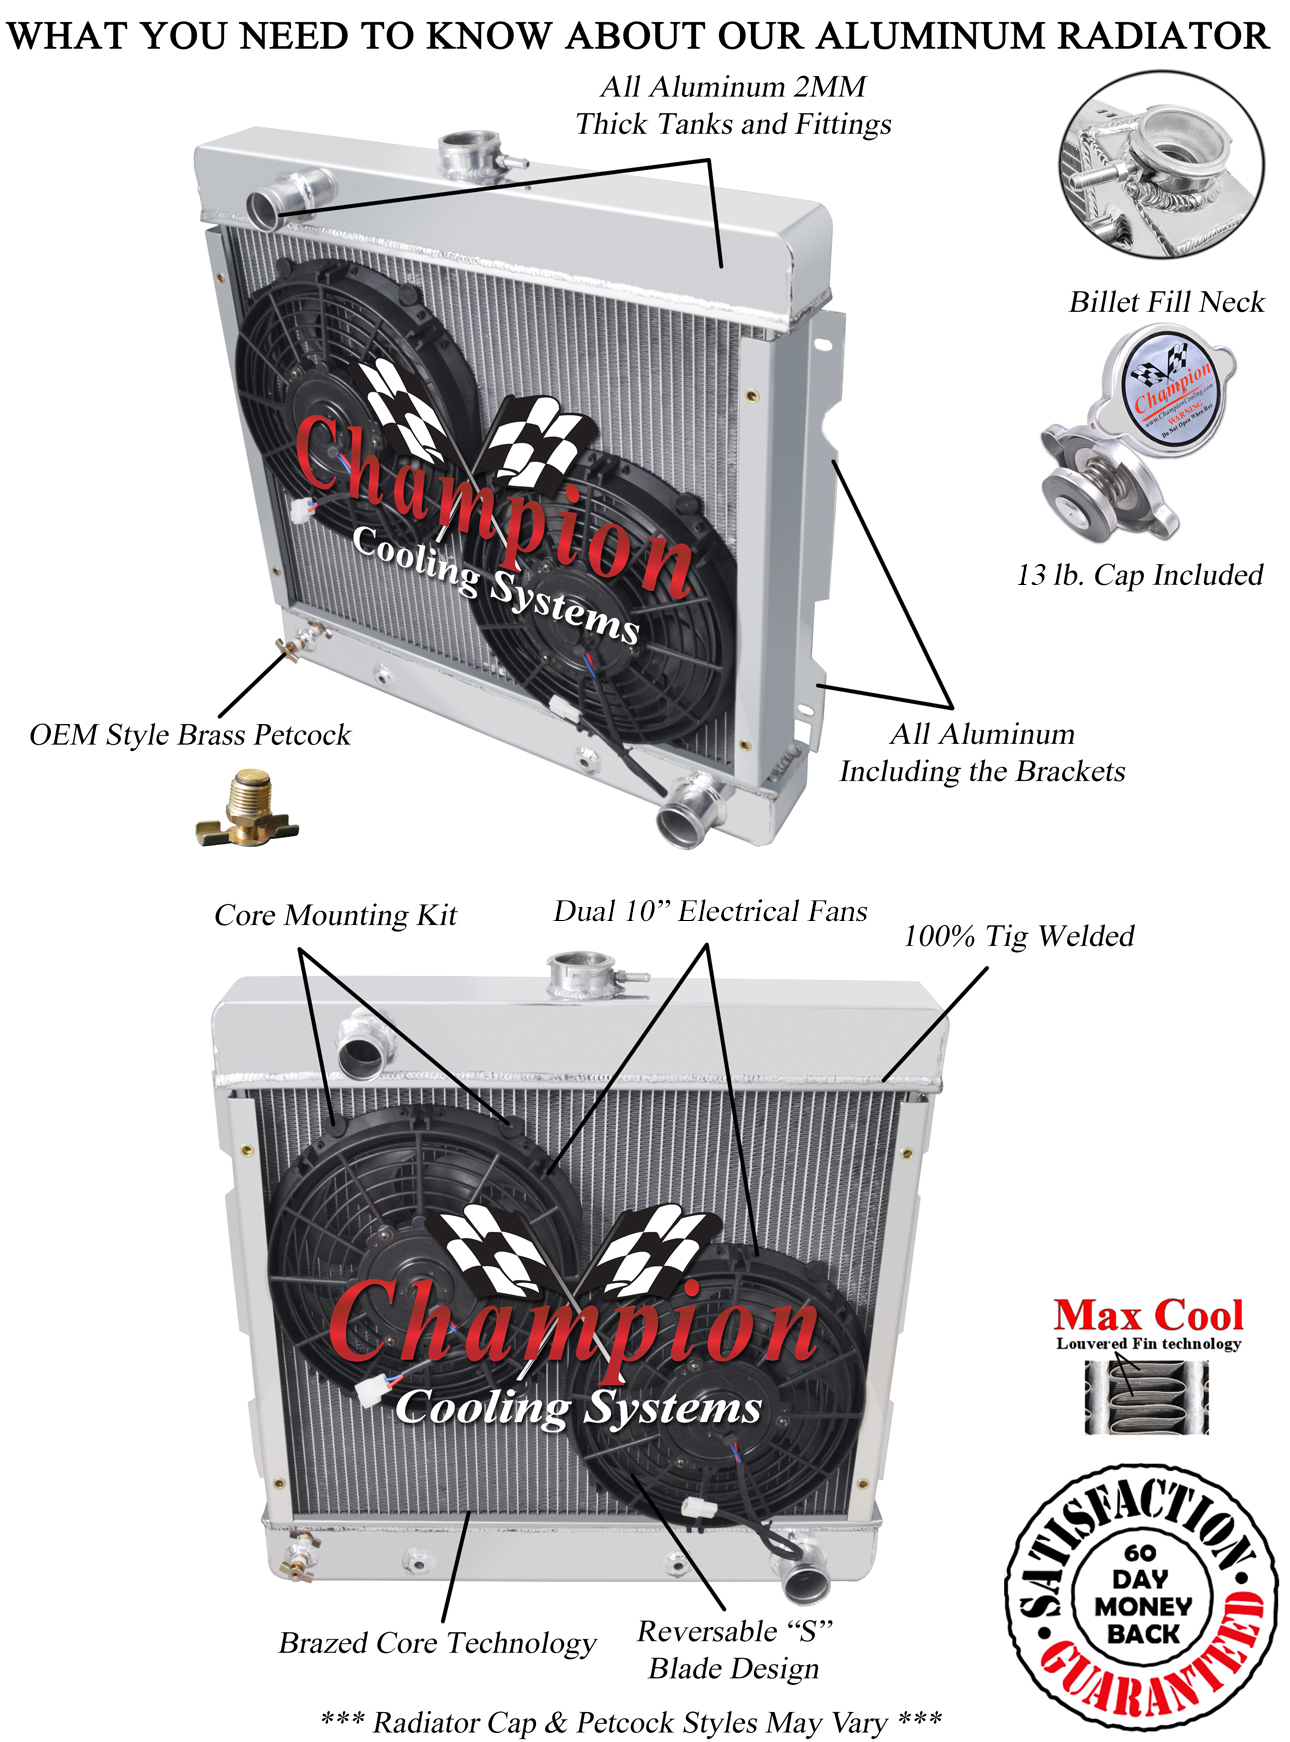 https://www.championcooling.com/photos/Photos%20White/With%20Fans/Combos/526/2x14/526_2f_d_w.jpg